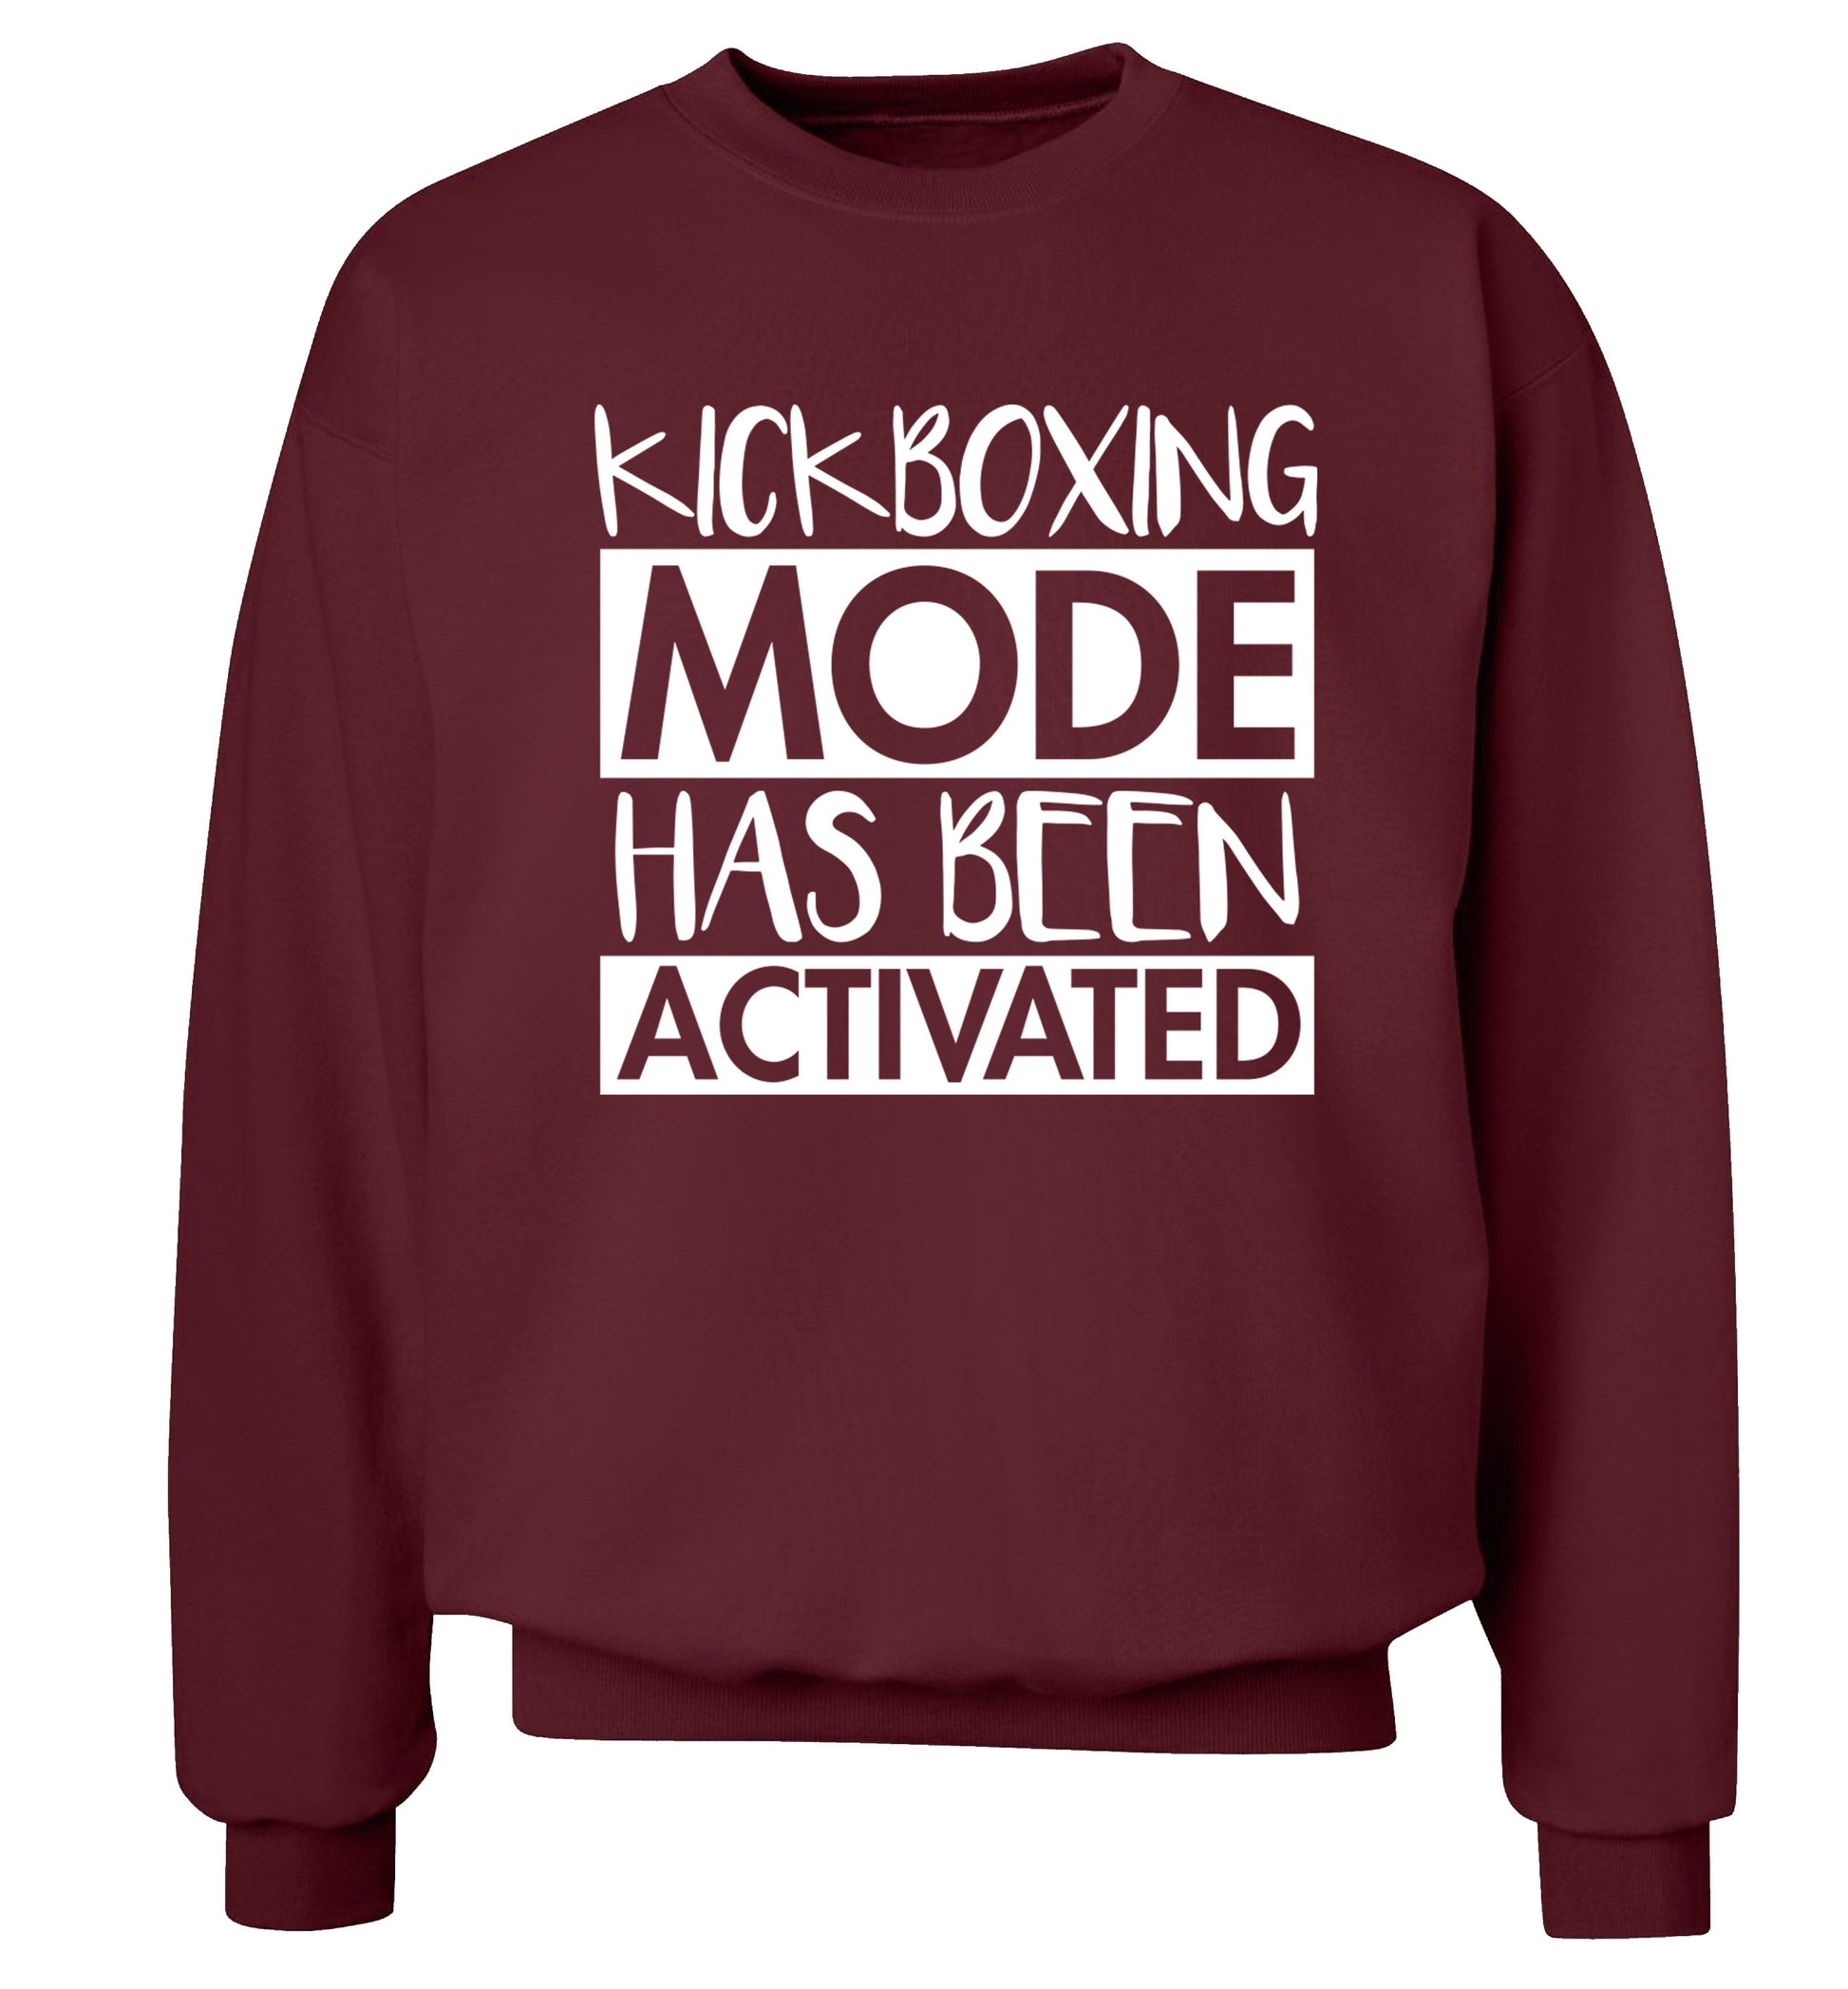 Kickboxing mode activated Adult's unisex maroon Sweater 2XL